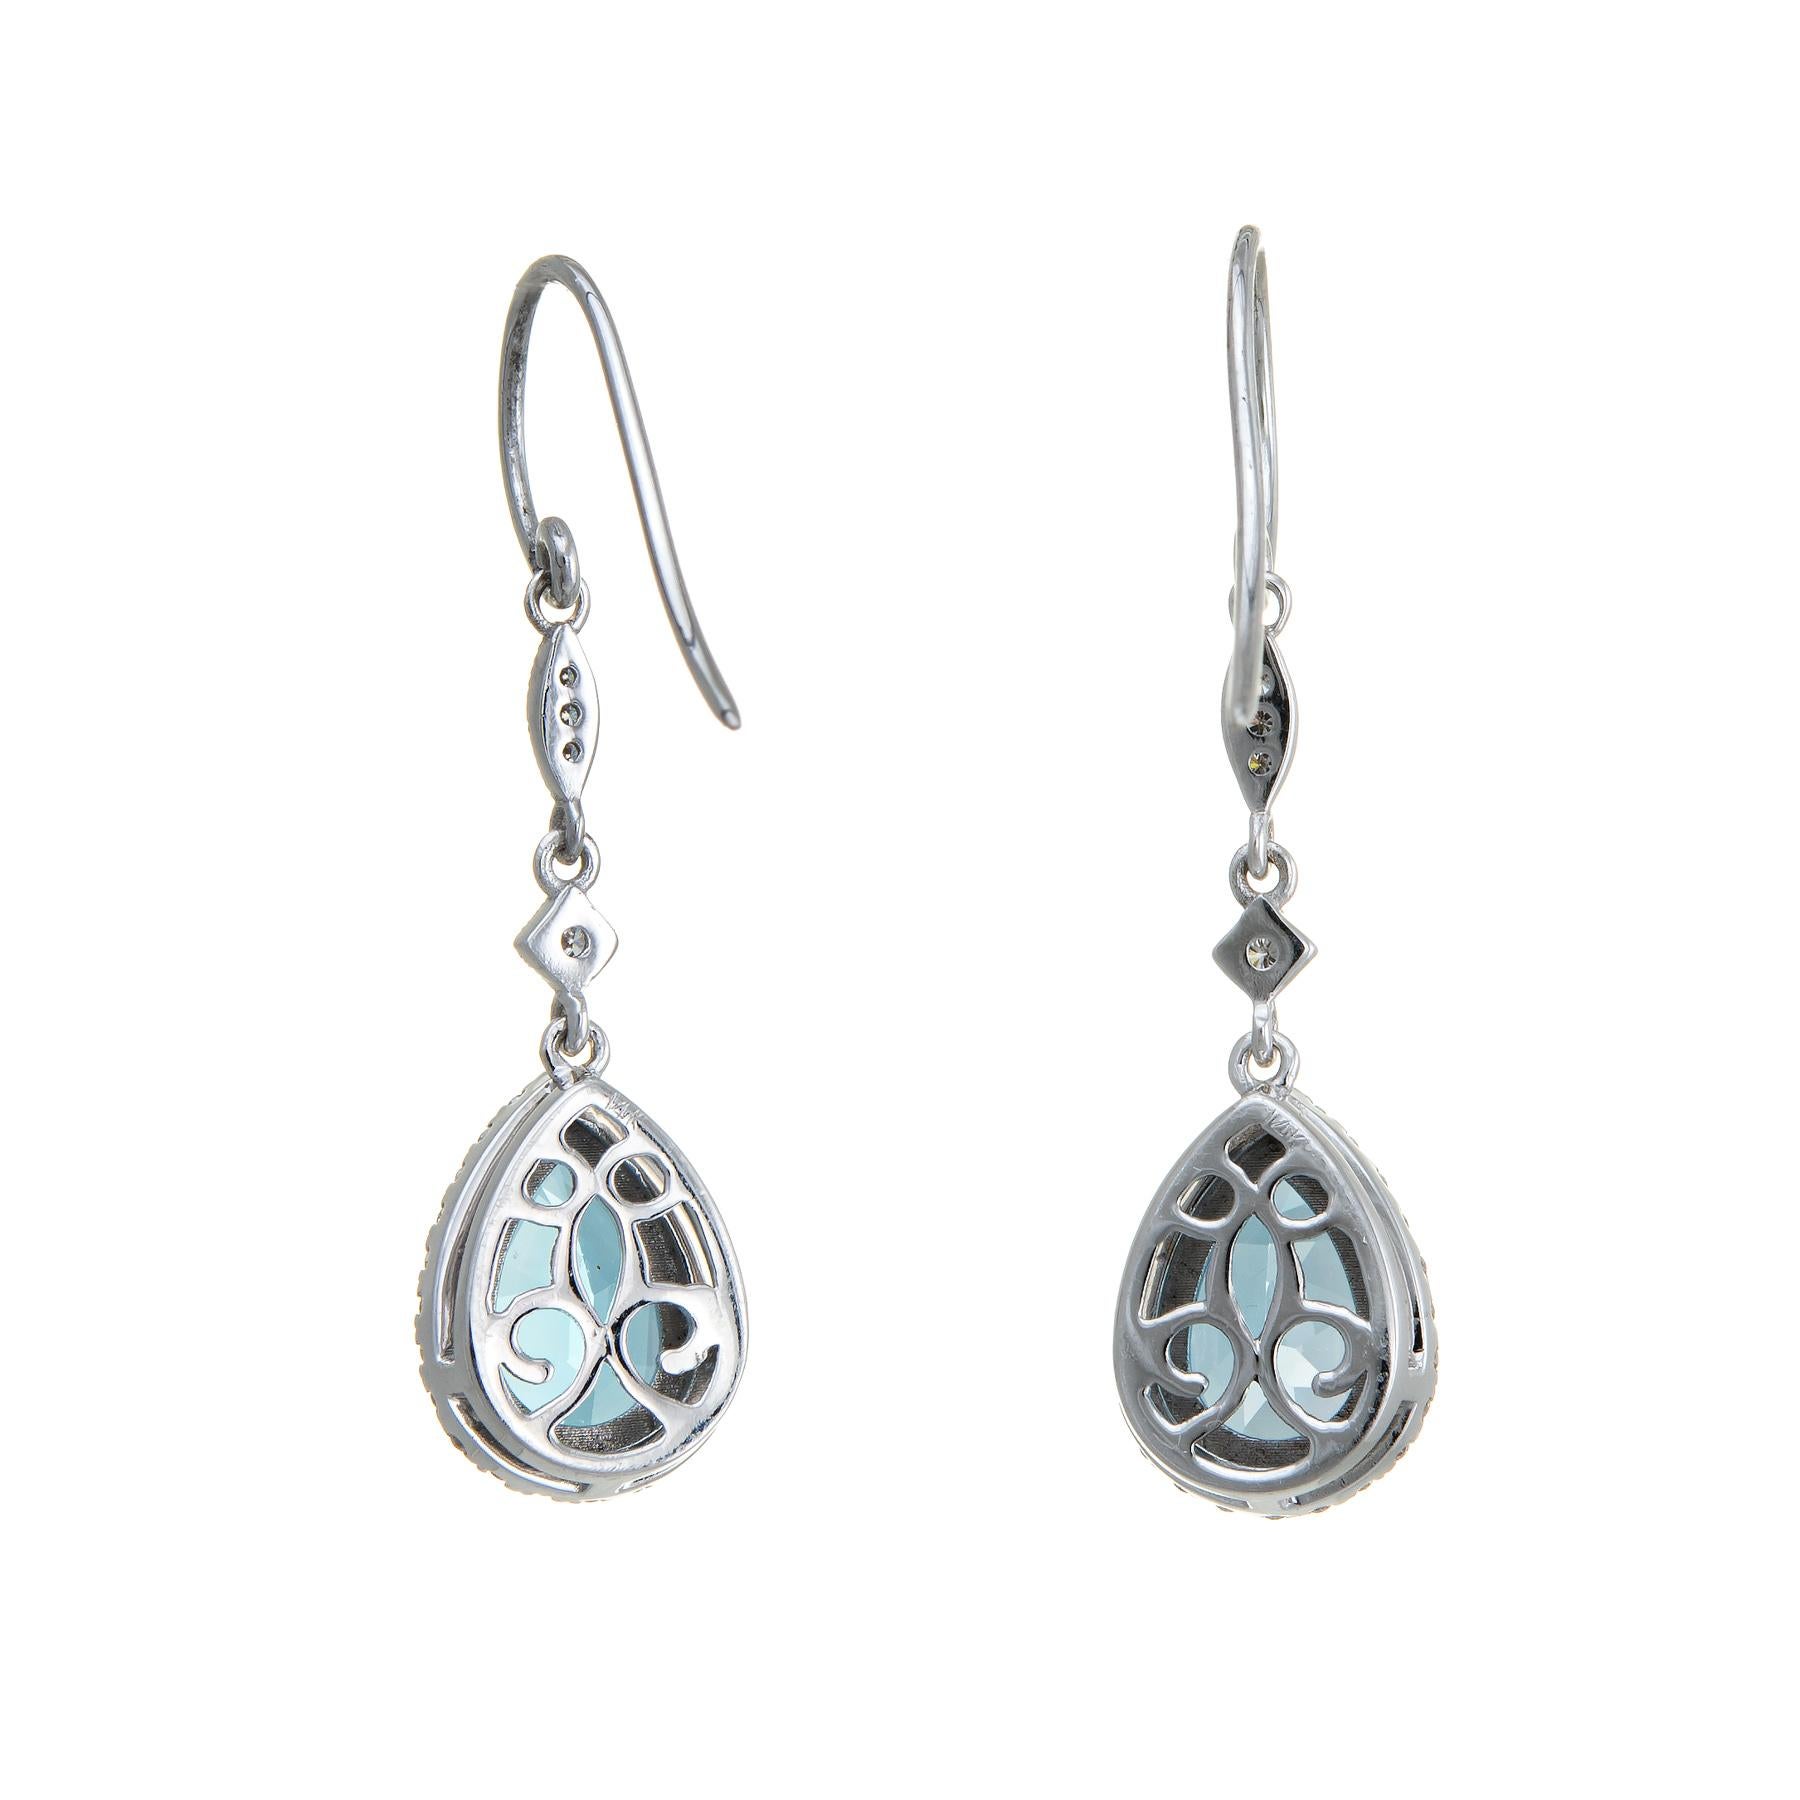 Elegant pair of estate blue topaz & diamond drop earrings, crafted in 14k white gold. 

Pear shaped blue topaz measures 10mm x 7mm (estimated at 2 carats each - 4 carats total estimated weight). The diamonds total an estimated 0.28 carats (estimated